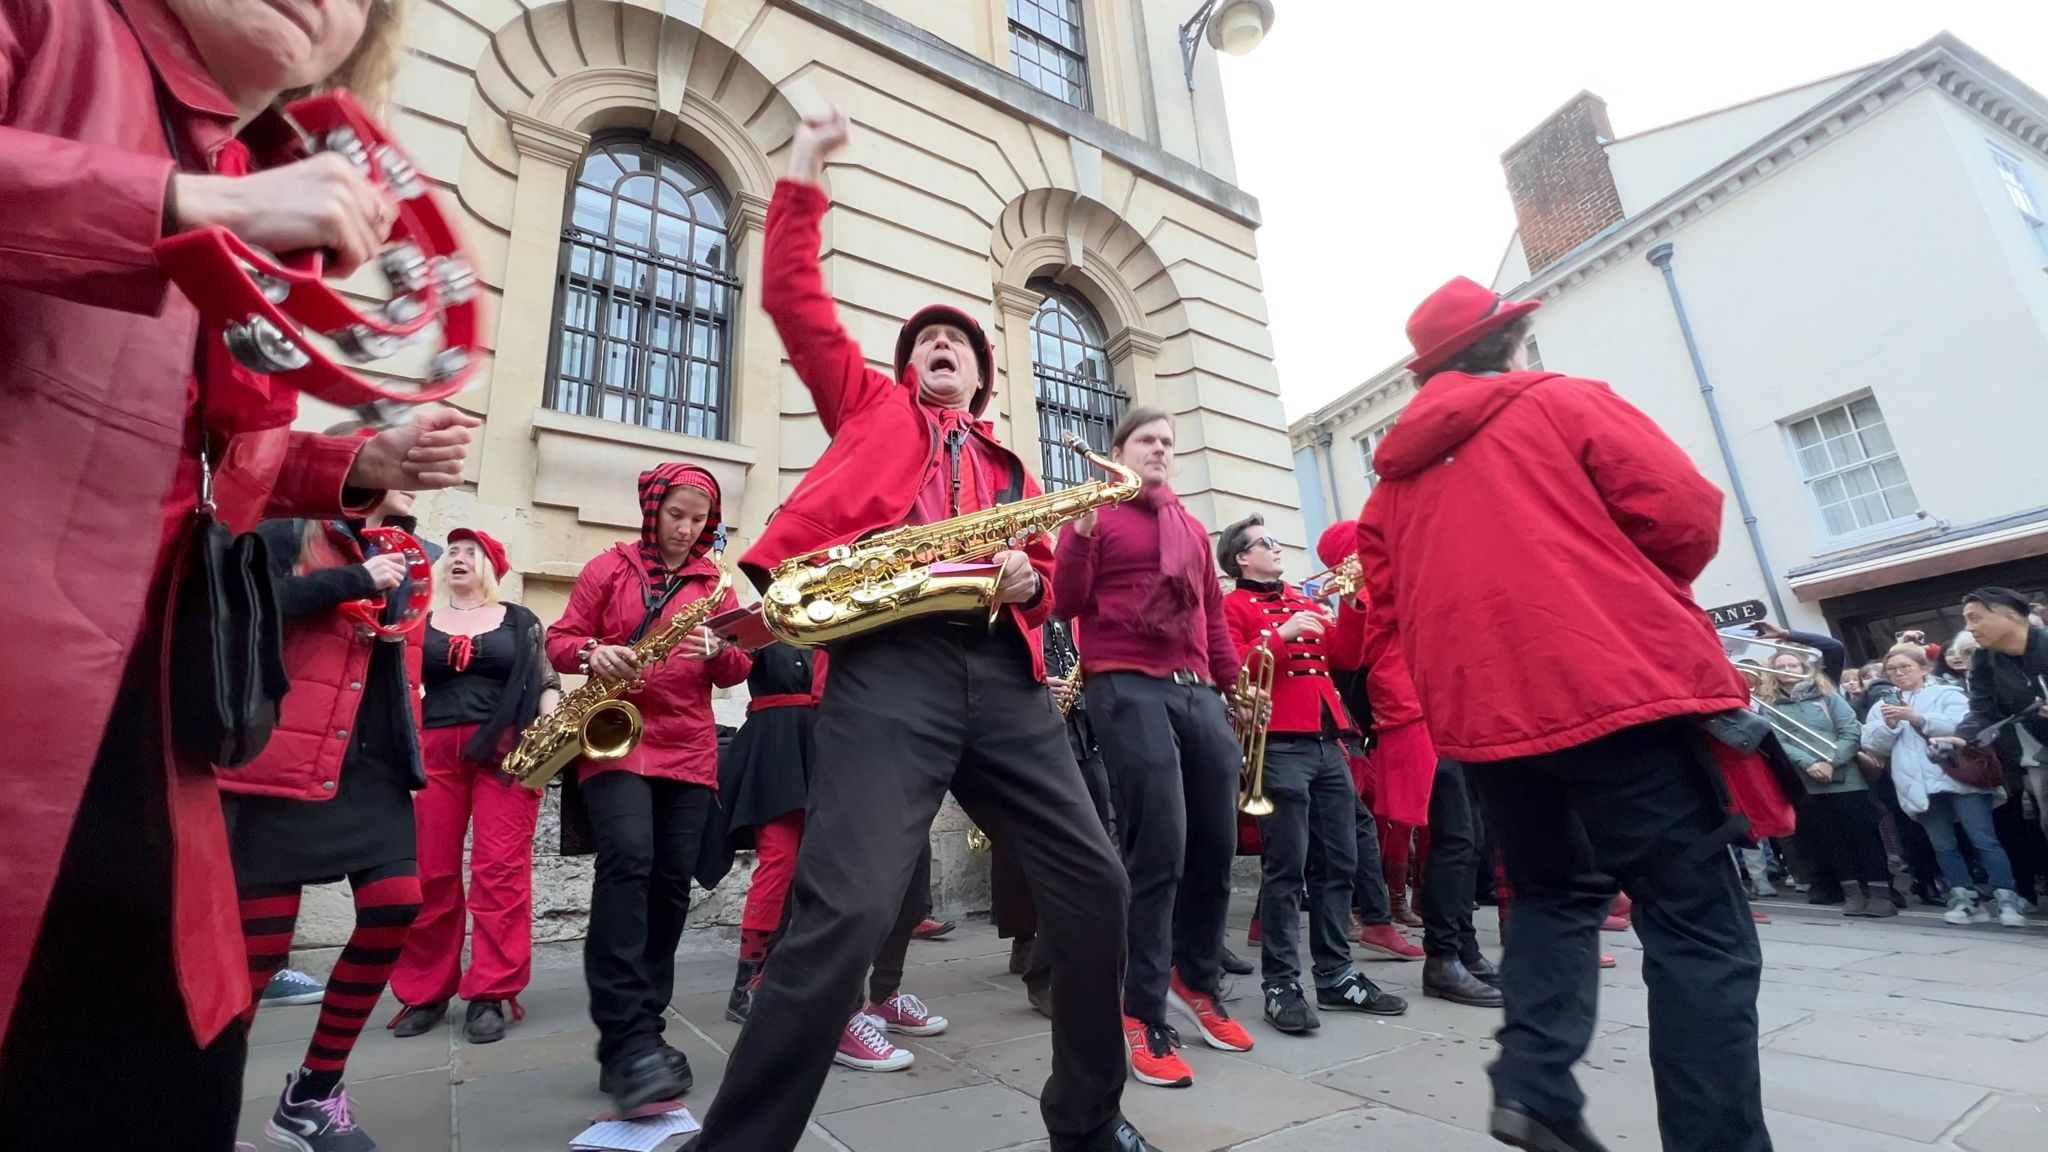 A band dressed in red playing saxophones.